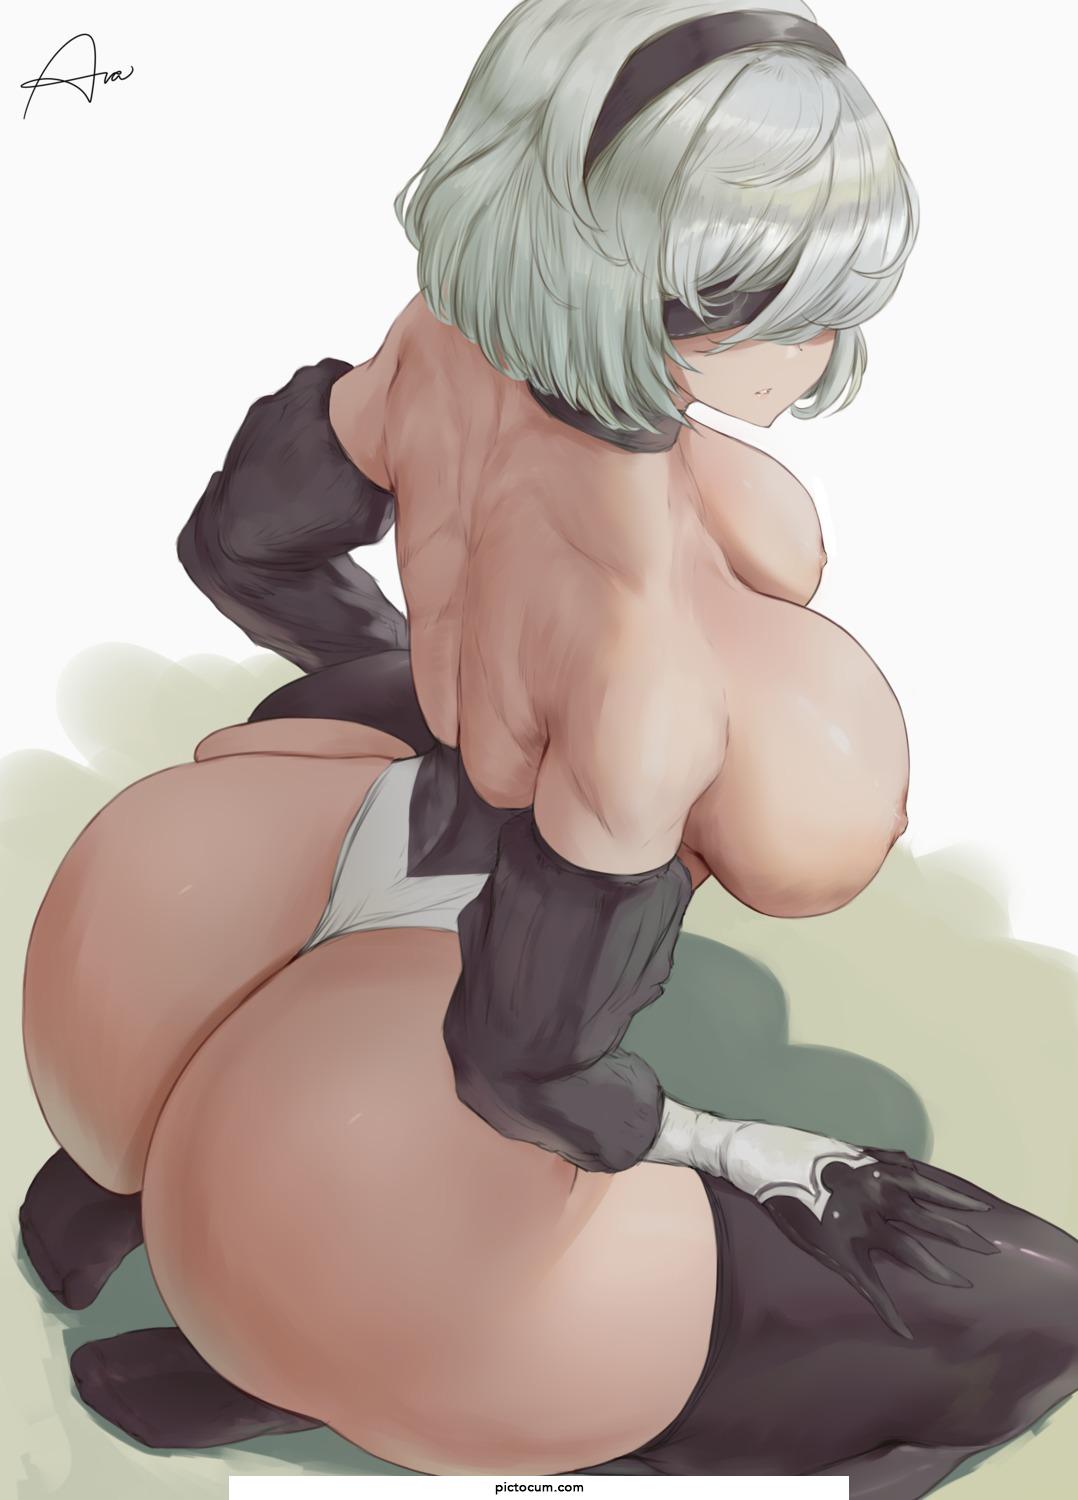 2B is well endowed on top and bottom